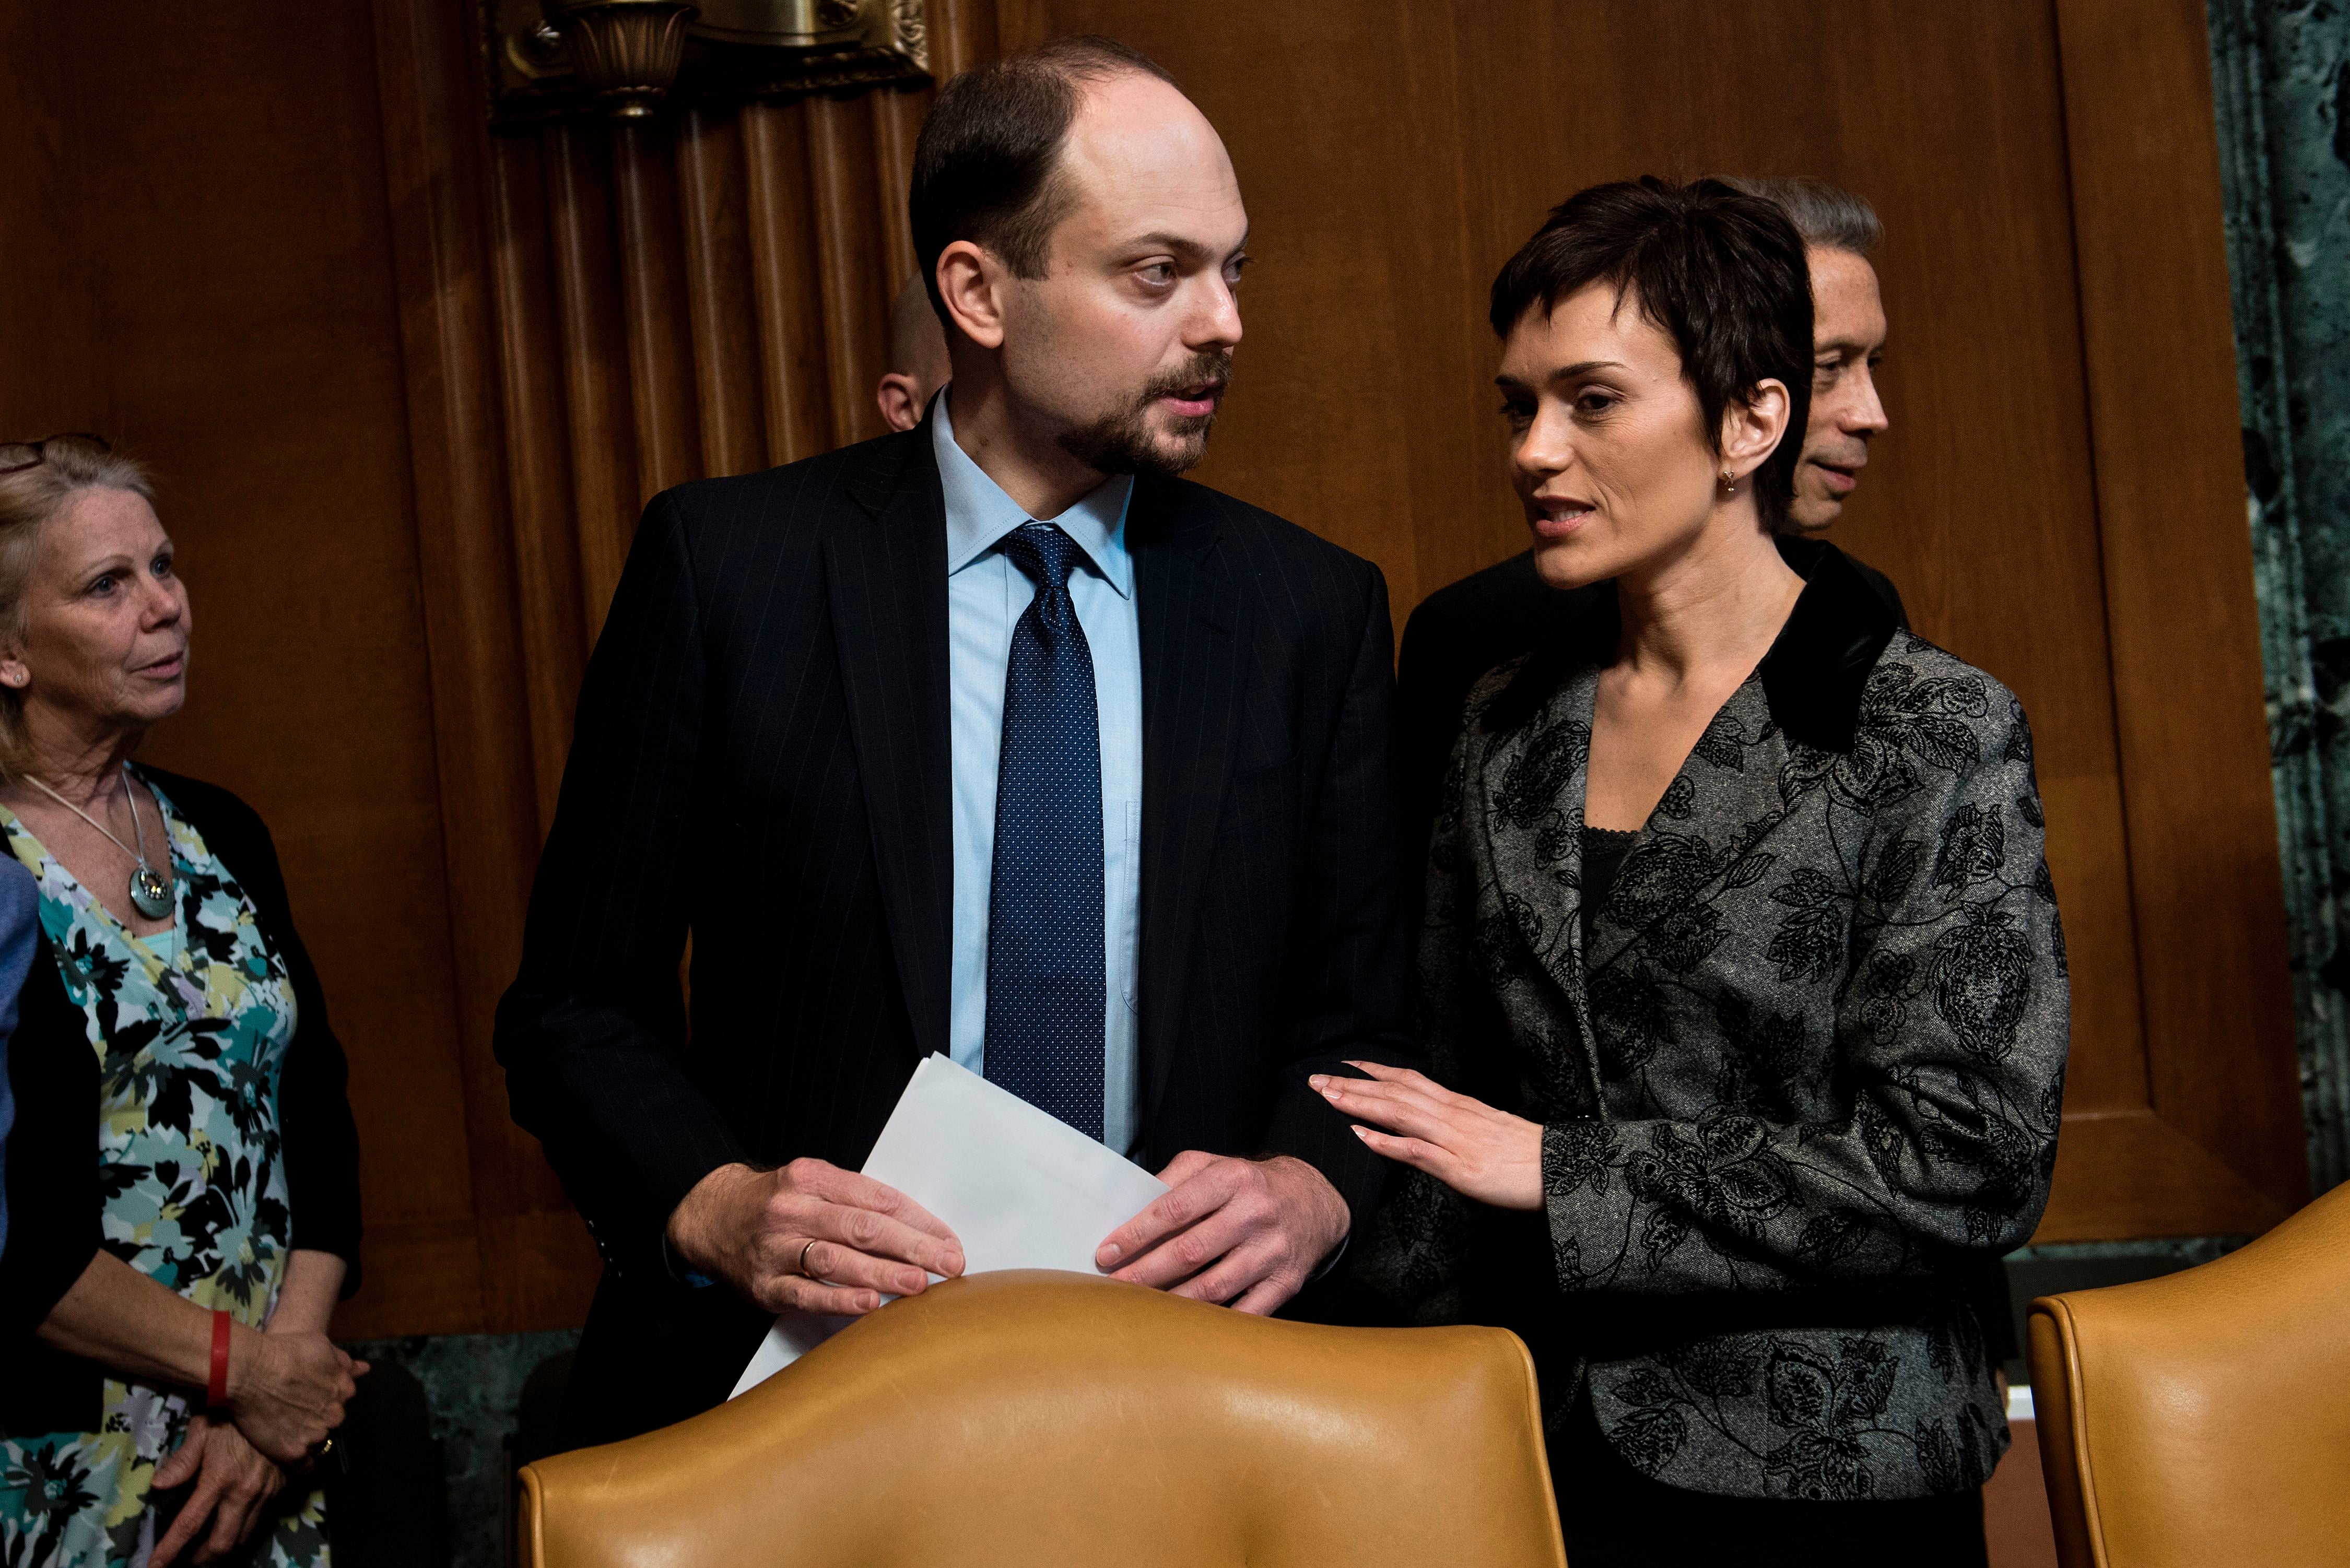 Russian activist Vladimir Kara-Murza arrives with his wife Evgenia for a hearing in Washington DC in 2017